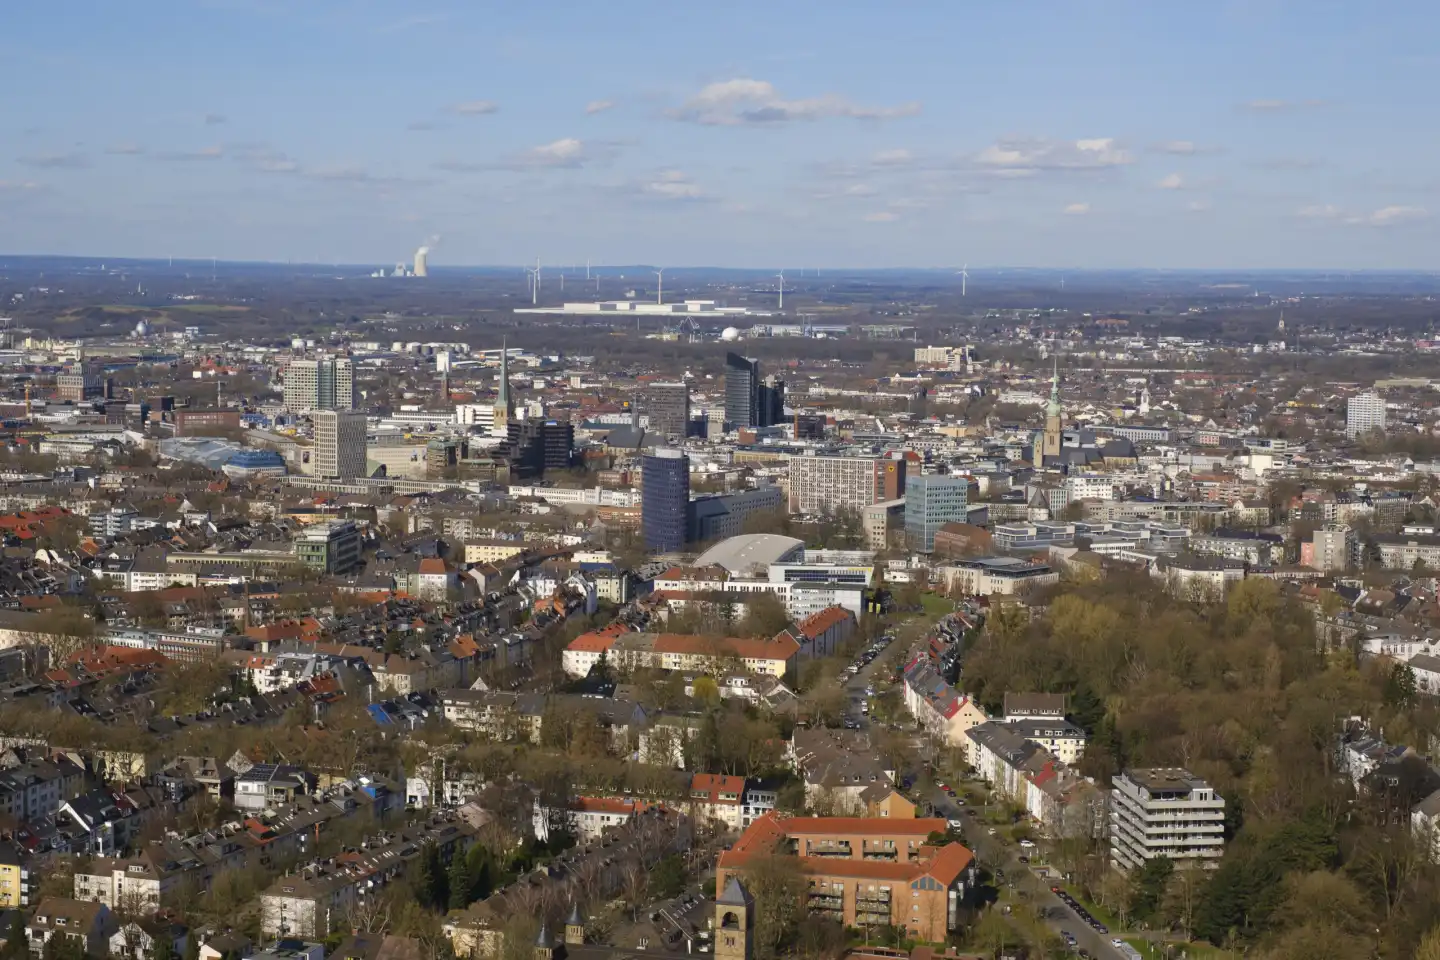 View of the city from the television tower, Dortmund, Ruhr area, North Rhine-Westphalia, Germany, Europe